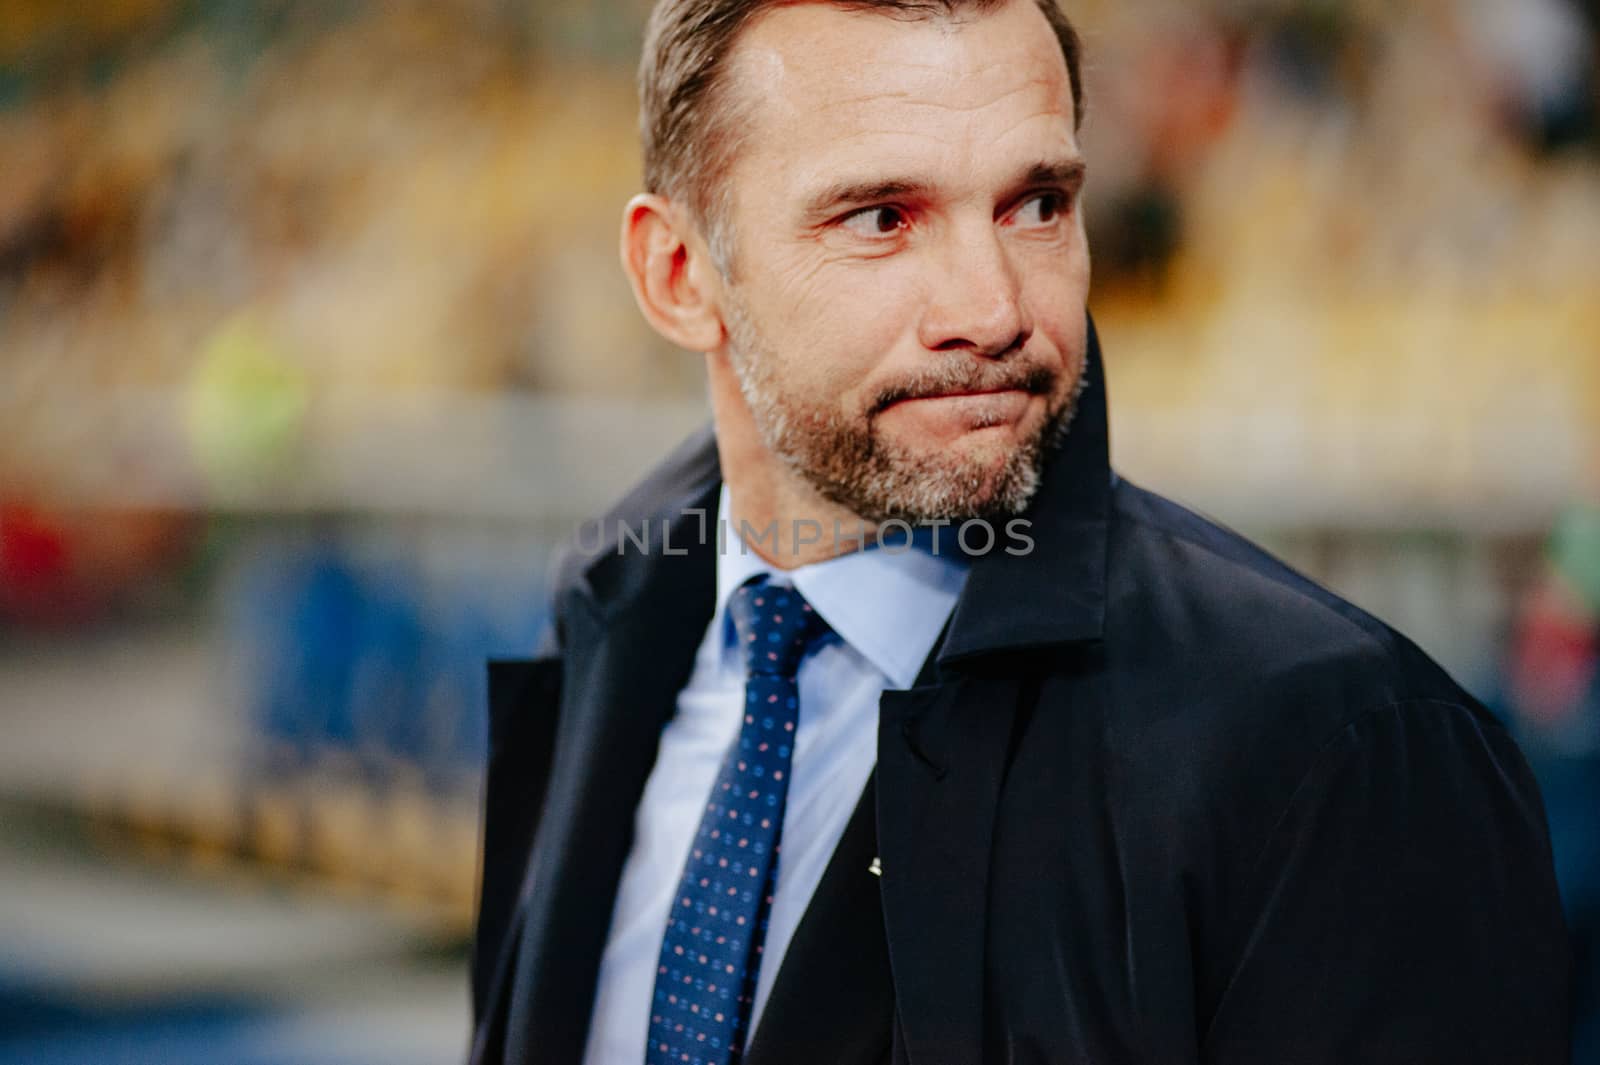 Kyiv, Ukraine - October 14, 2019: Andriy Shevchenko, head coach (manager) of Ukraine national football team before match of the qualifying EURO 2020 vs Portugal at the Olympic Stadium